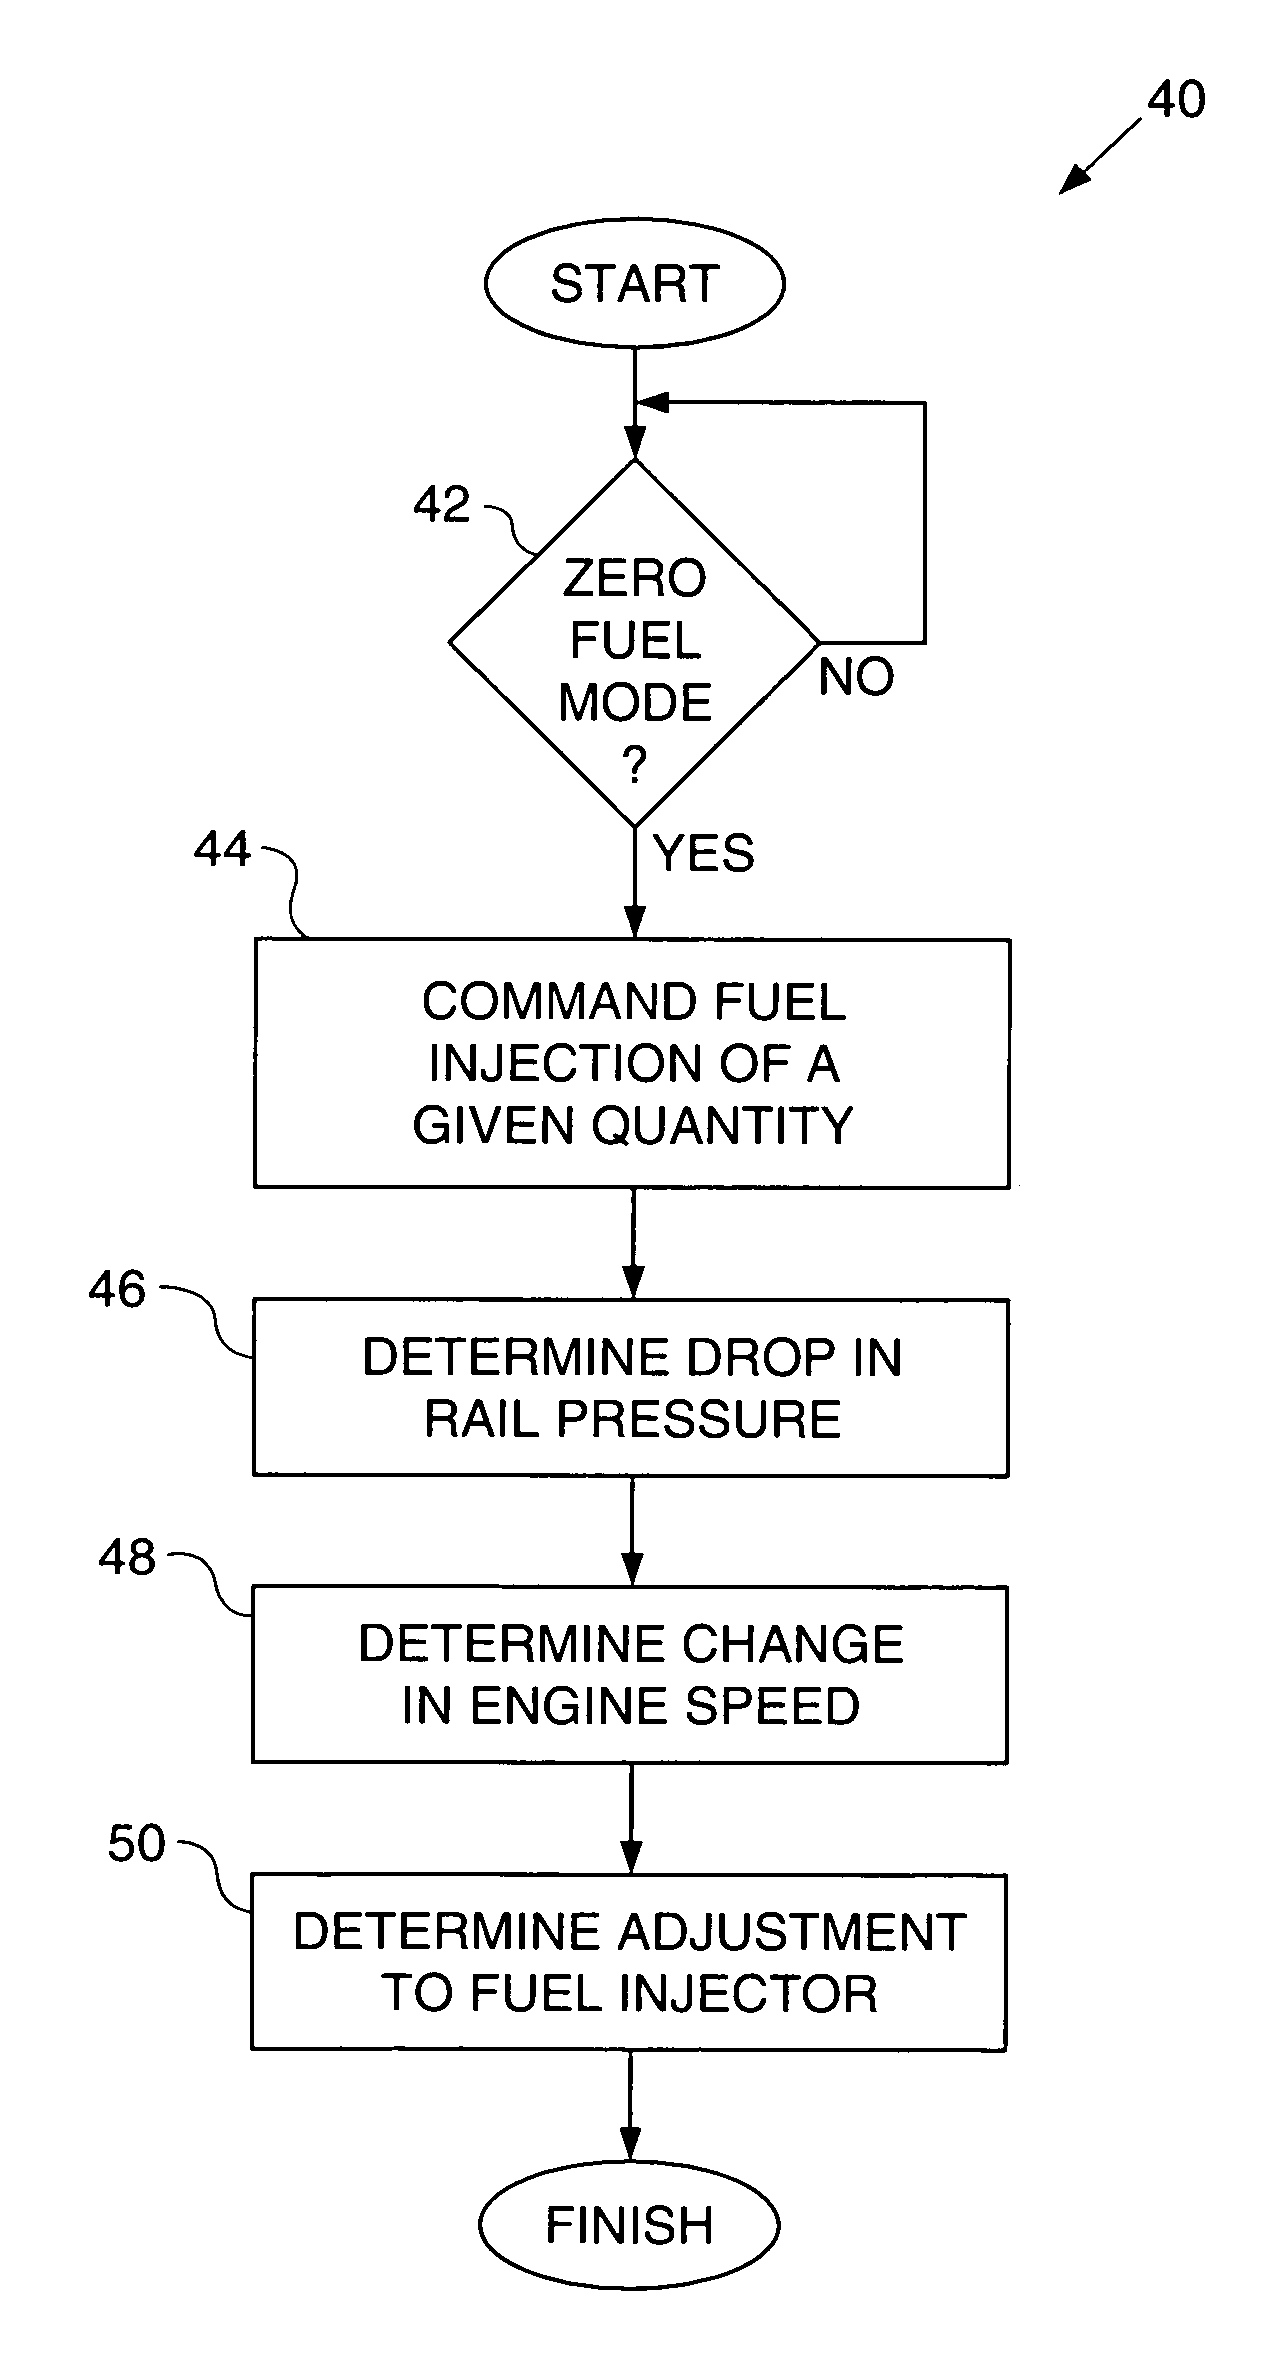 Adaptive fuel injector trimming during a zero fuel condition